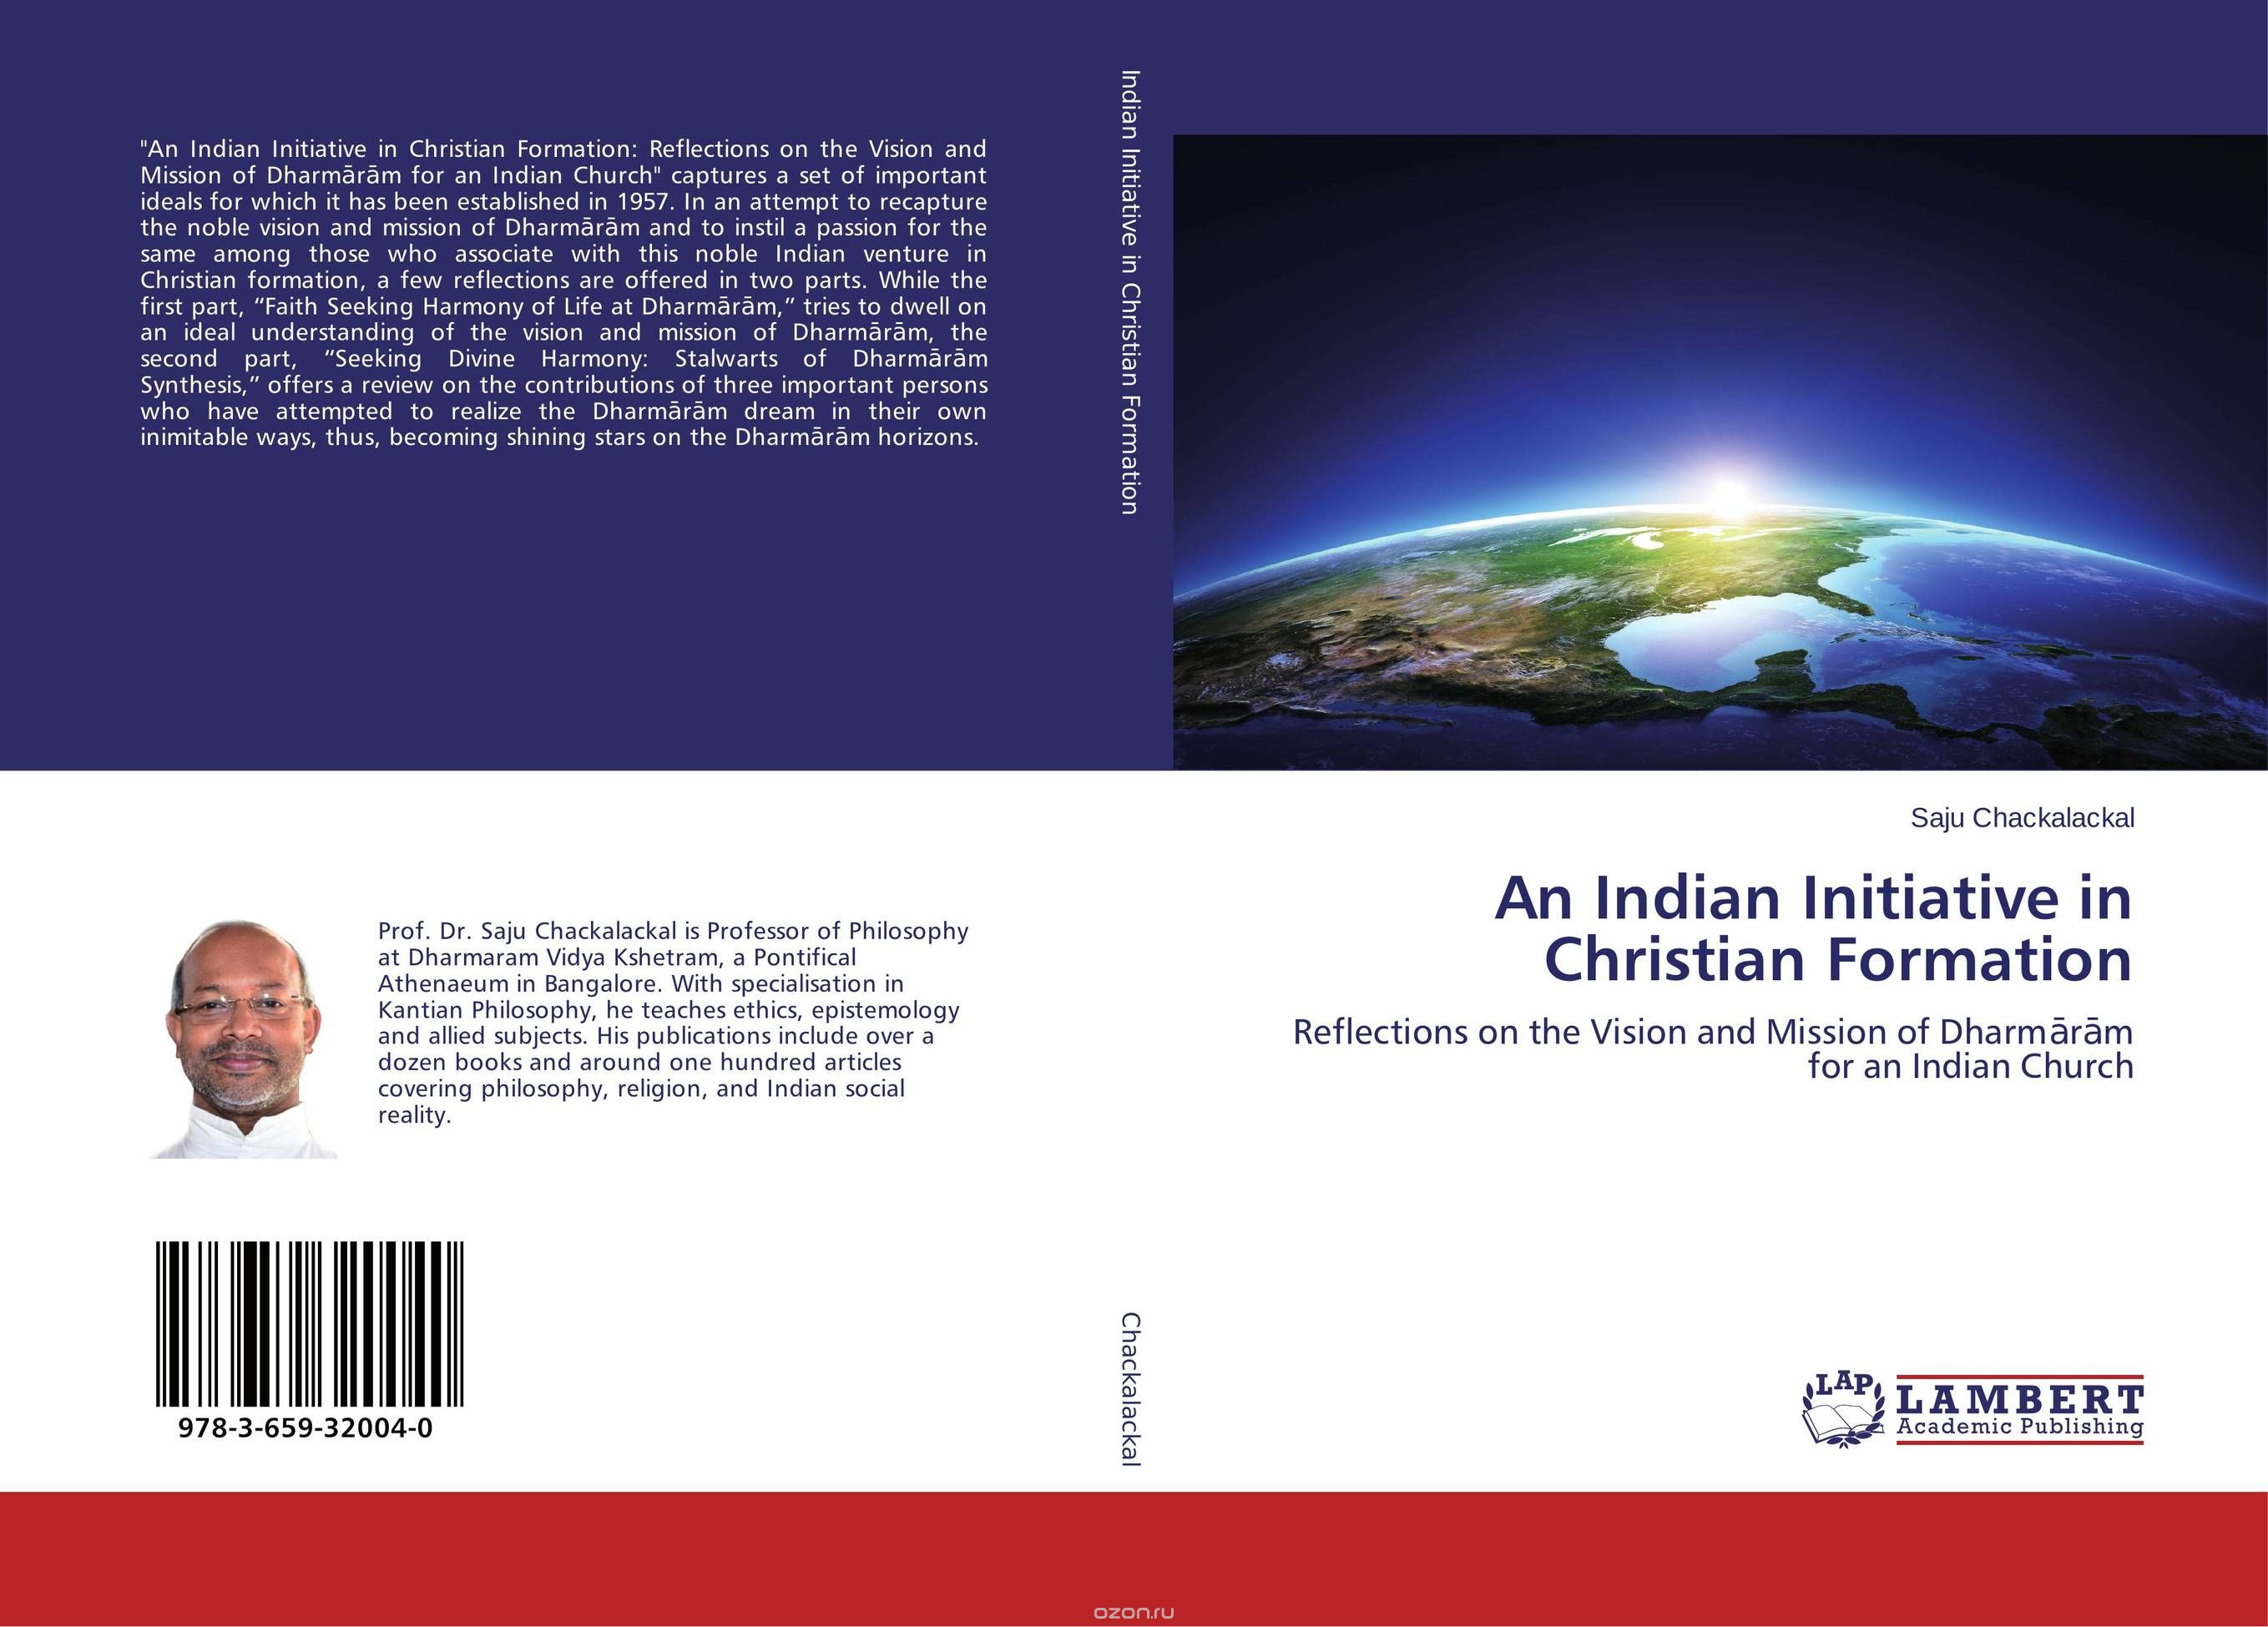 An Indian Initiative in Christian Formation